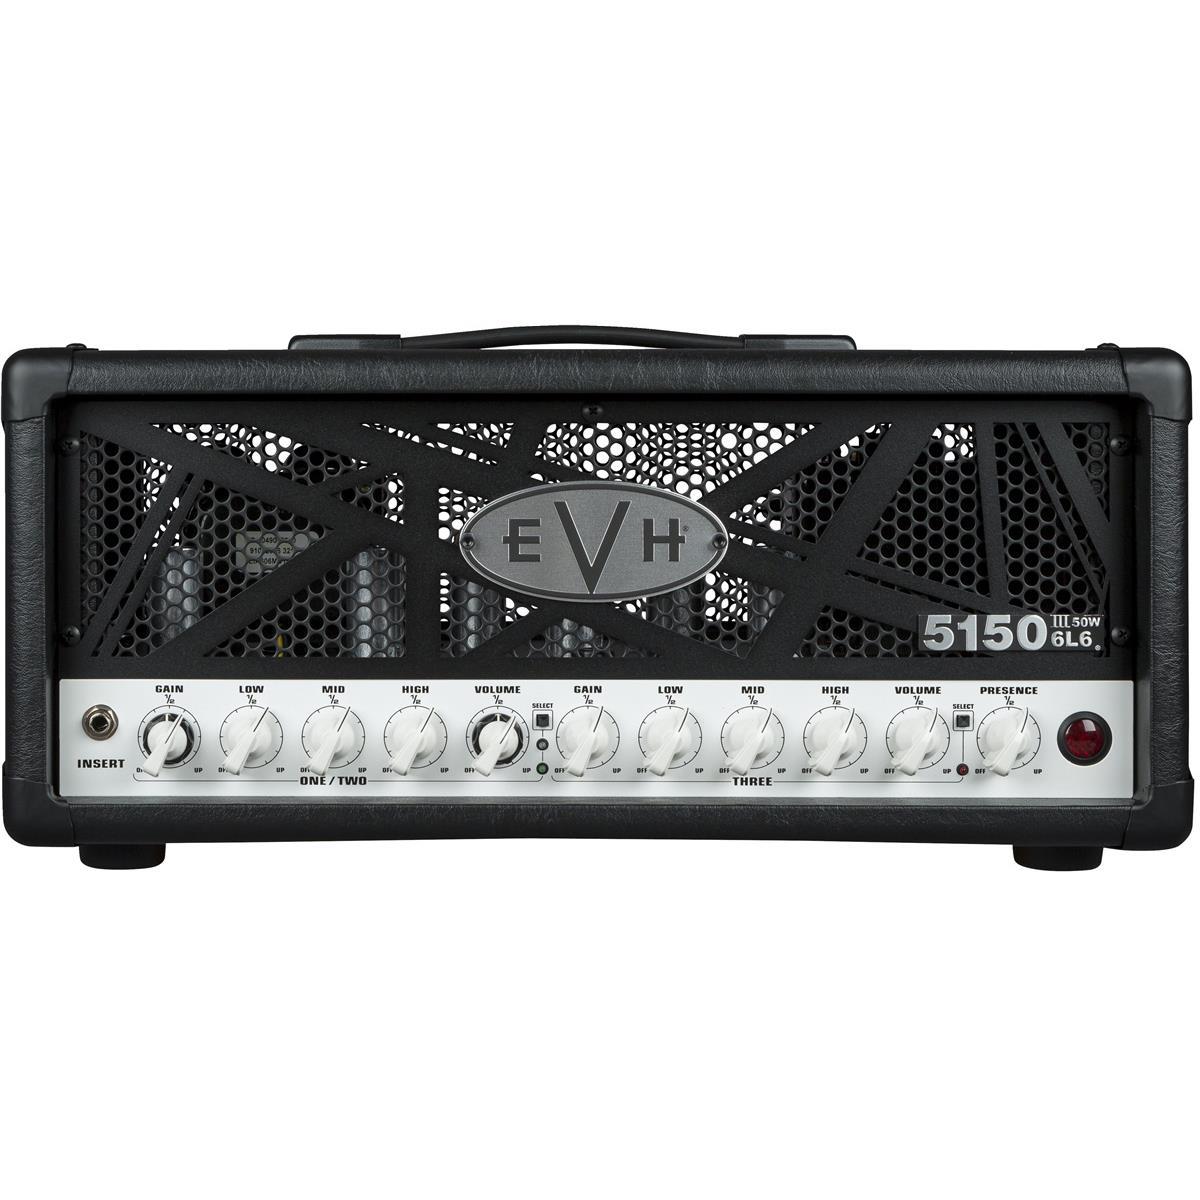 Telex EVH 5150III 50-Watt Amplifier with 6L6 Power Tube, 120V, Black With its smaller size and portability, the EVH 5150III 50W 6L6 Head is the perfect amp for players who want arena volume and performance in a compact package. Three channels of road-tested sound work for any playing style - crisp cleans, raw crunch or searing leads, while newly added independent dual-concentric controls allows for gain and volume level matching. This 2.0 version of our popular 50-watt head delivers a full-spectrum of tone - channel one powers crystal-clear clean tone, channel two ranges from chunky overdrive to tight distortion and channel three oozes with liquid gain. Channels one and two each have dual concentric gain/volume controls, with shared EQ (low, mid, high). Channel three has its own gain, volume and EQ (low, mid, high) controls. All three channels also have global presence and global resonance controls. This amp head also includes selectable impedance (4, 8 or 16 Ohms), dual parallel speaker output jacks, effects loop, headphone jack, line out and a four-button footswitch with 1/4" input jack and MIDI input. Loaded with pure EVH sound and power, the EVH 5150III 50W 6L6 Head is wrapped in Black or Ivory textured vinyl and features our instantly recognizable black EVH-striped steel grille. A high- quality fitted cover is available as an EVH Accessory.